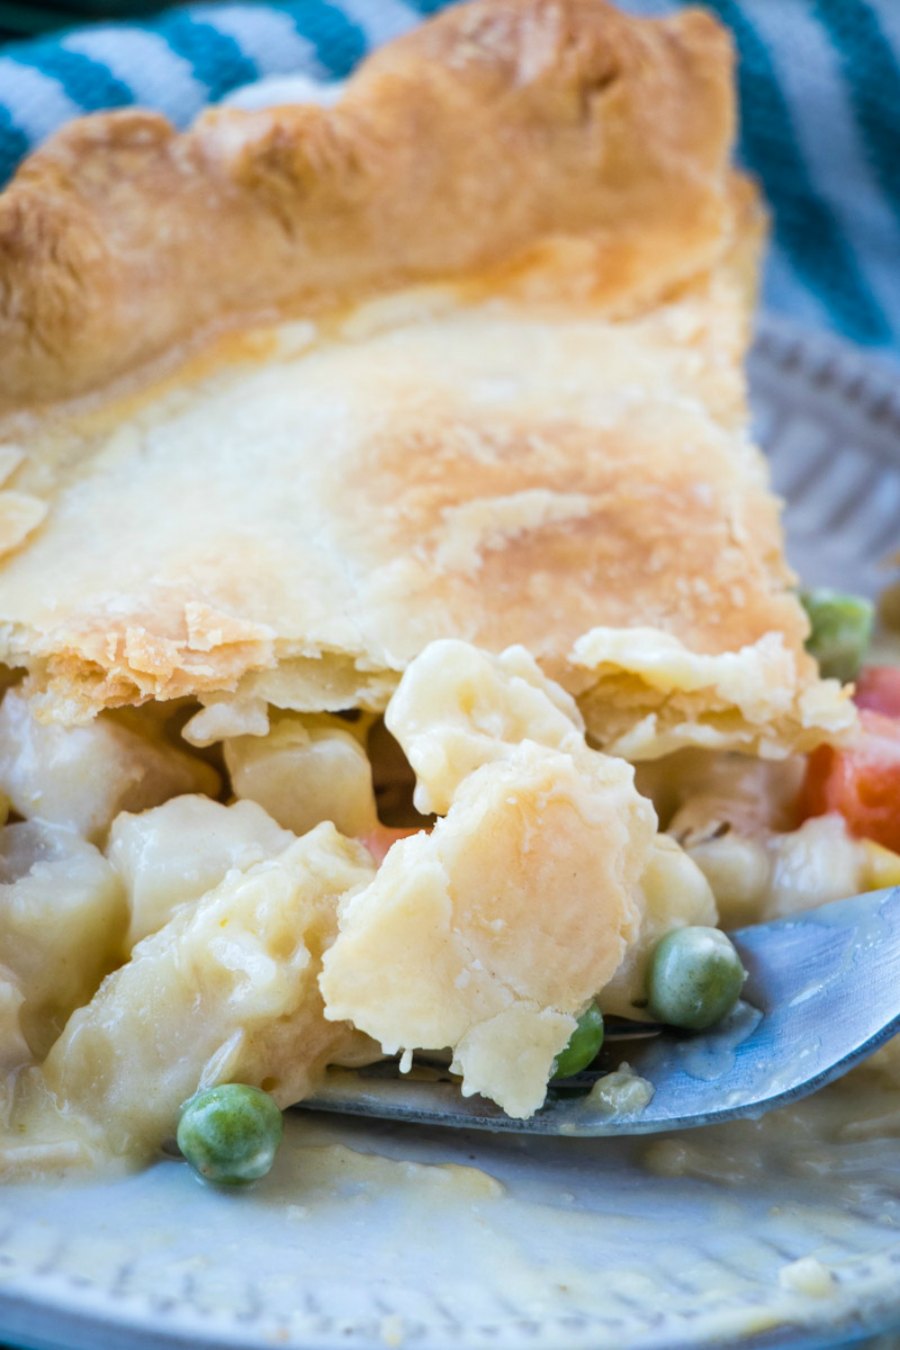 Fork getting a bite of creamy chicken pot pie showing veggies, potatoes, and chicken in the filling.